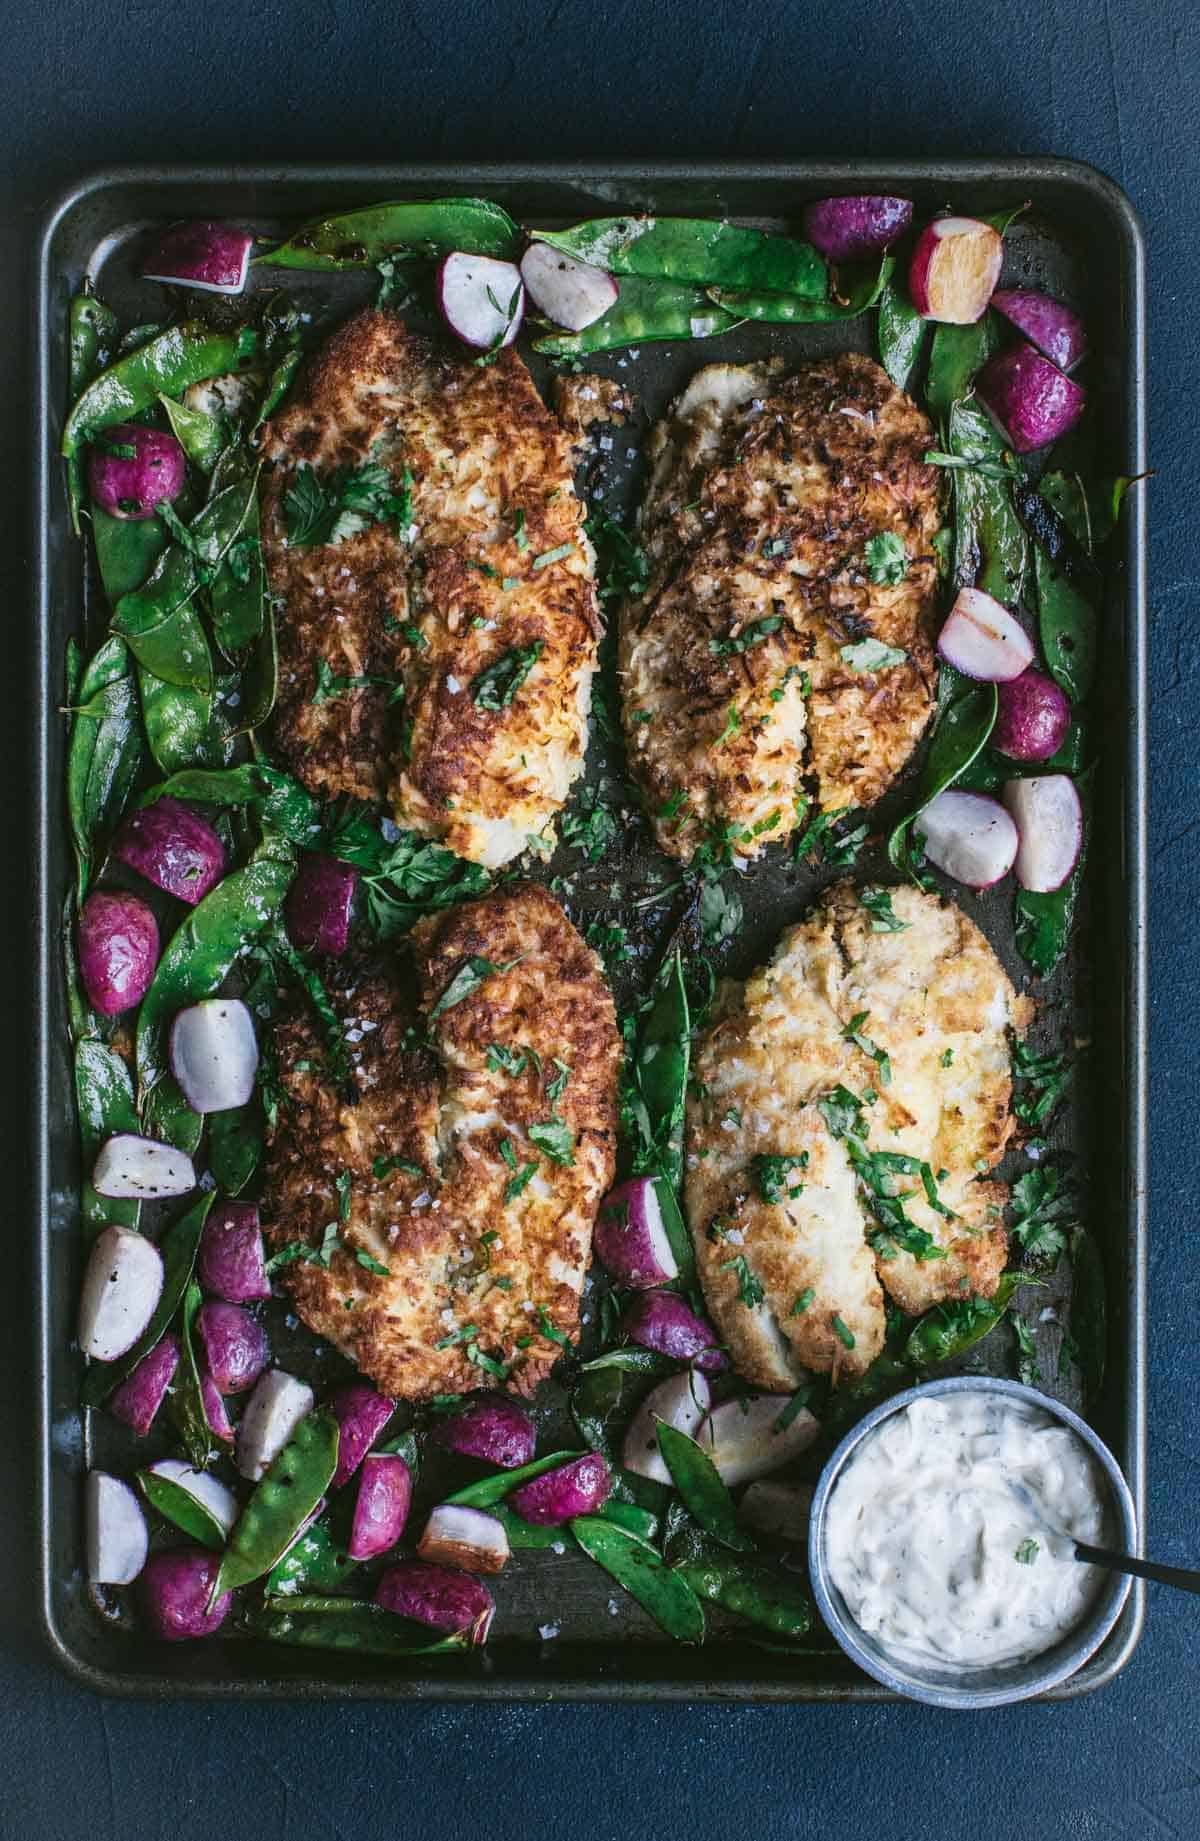 Keto Coconut Crusted Fish with Snap Peas and Radishes